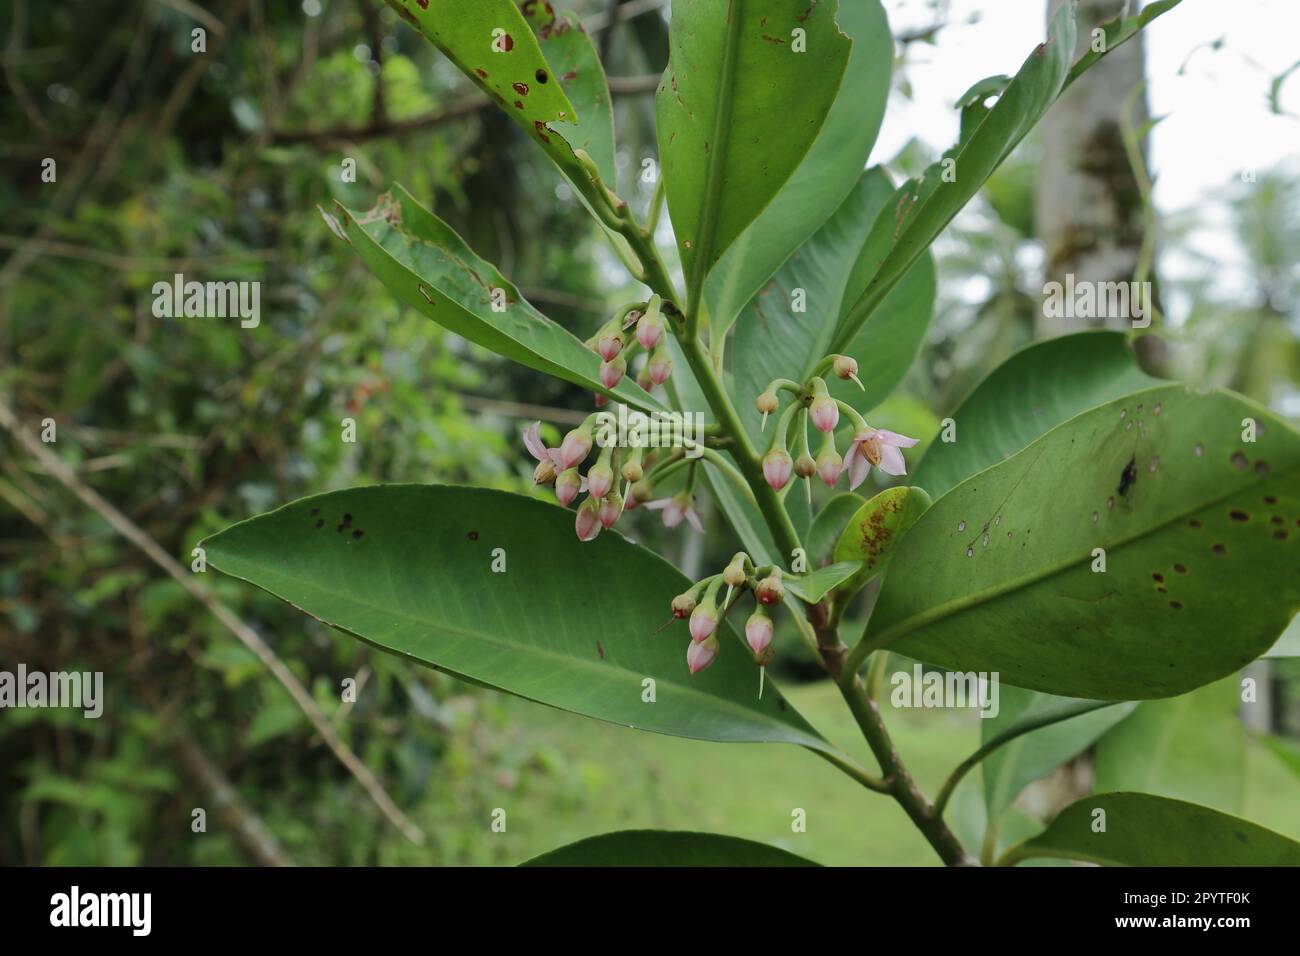 An Ardisia Elliptica (Balu Dan) twig view with blooming pink colored flower clusters and green leaves Stock Photo